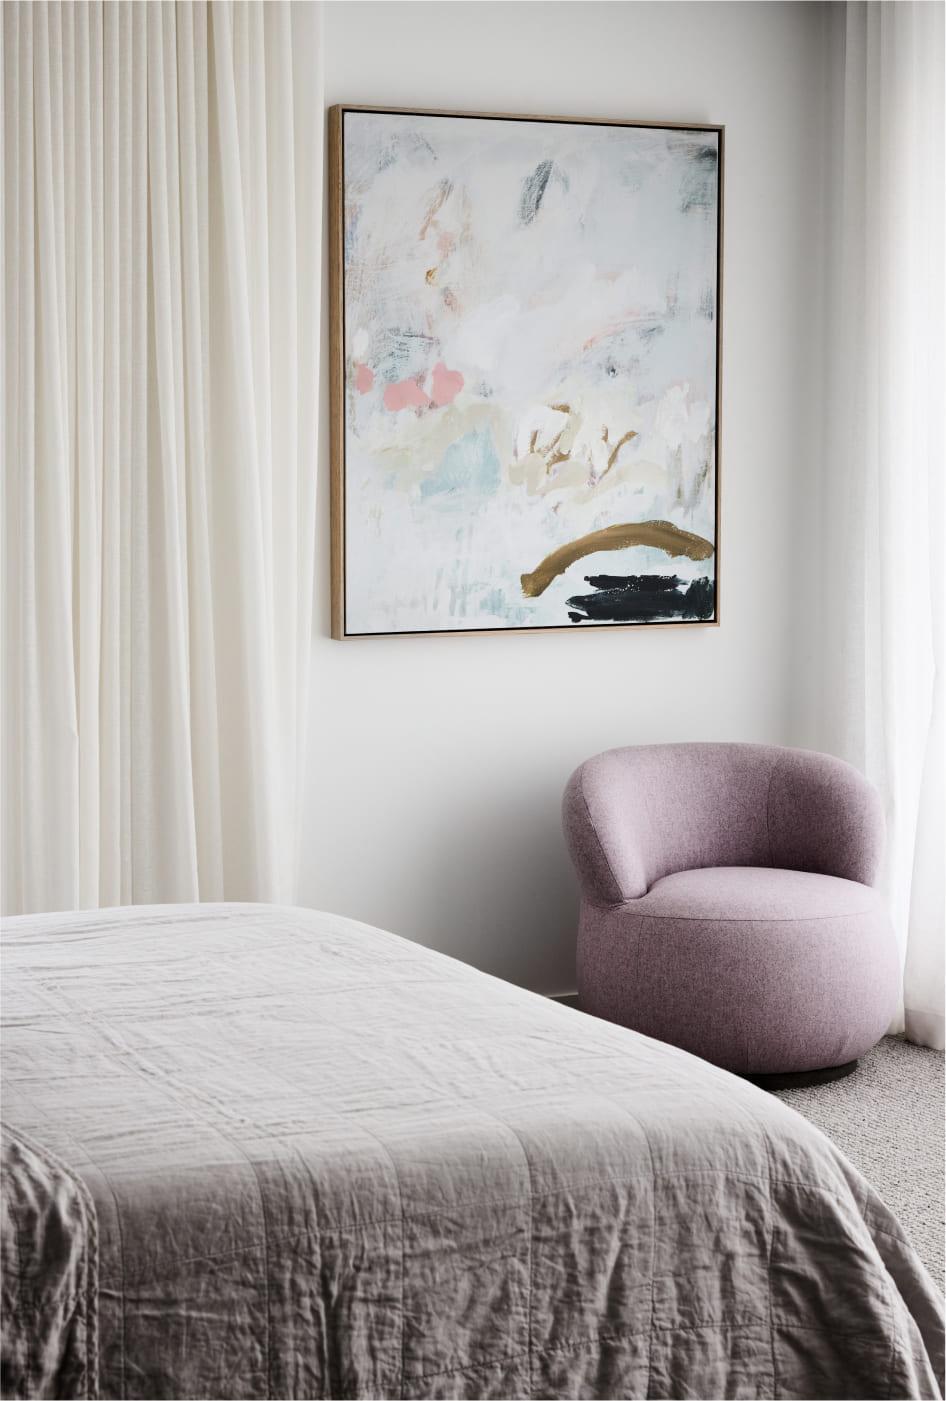 Master Suite with soft, pastel furnishings